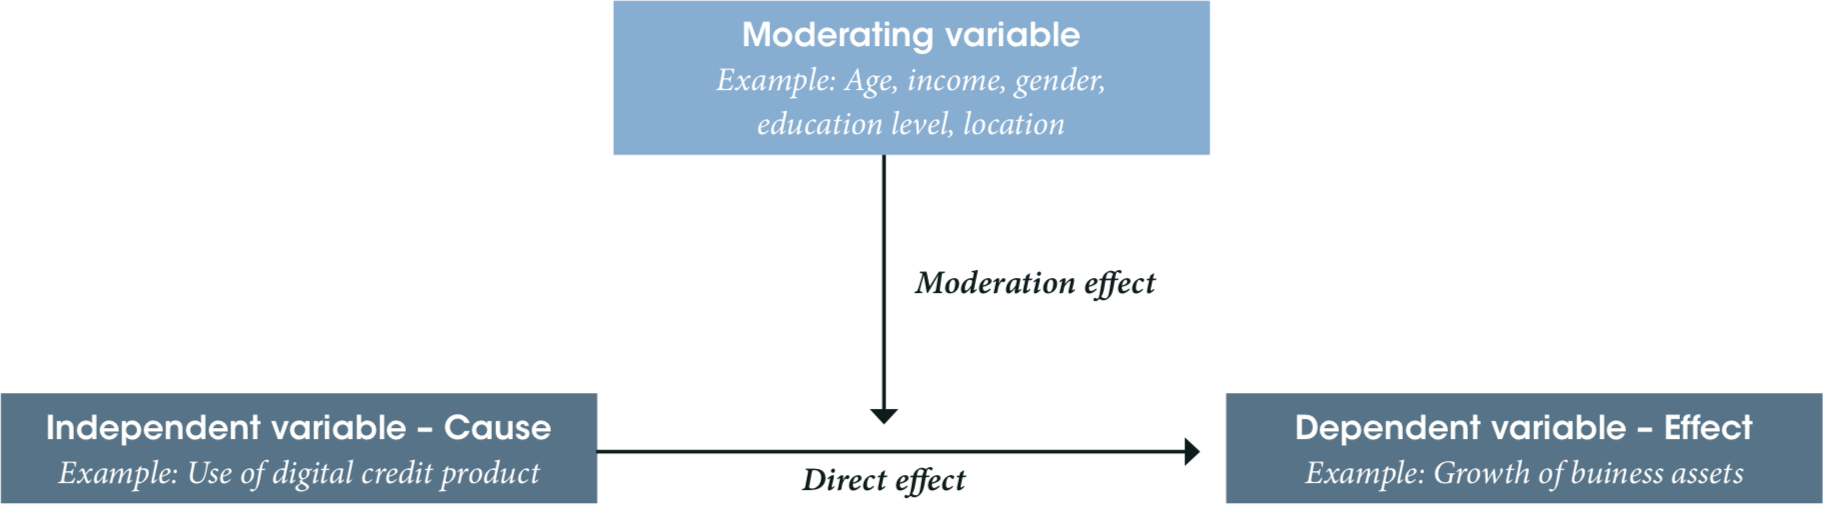 Moderation effects